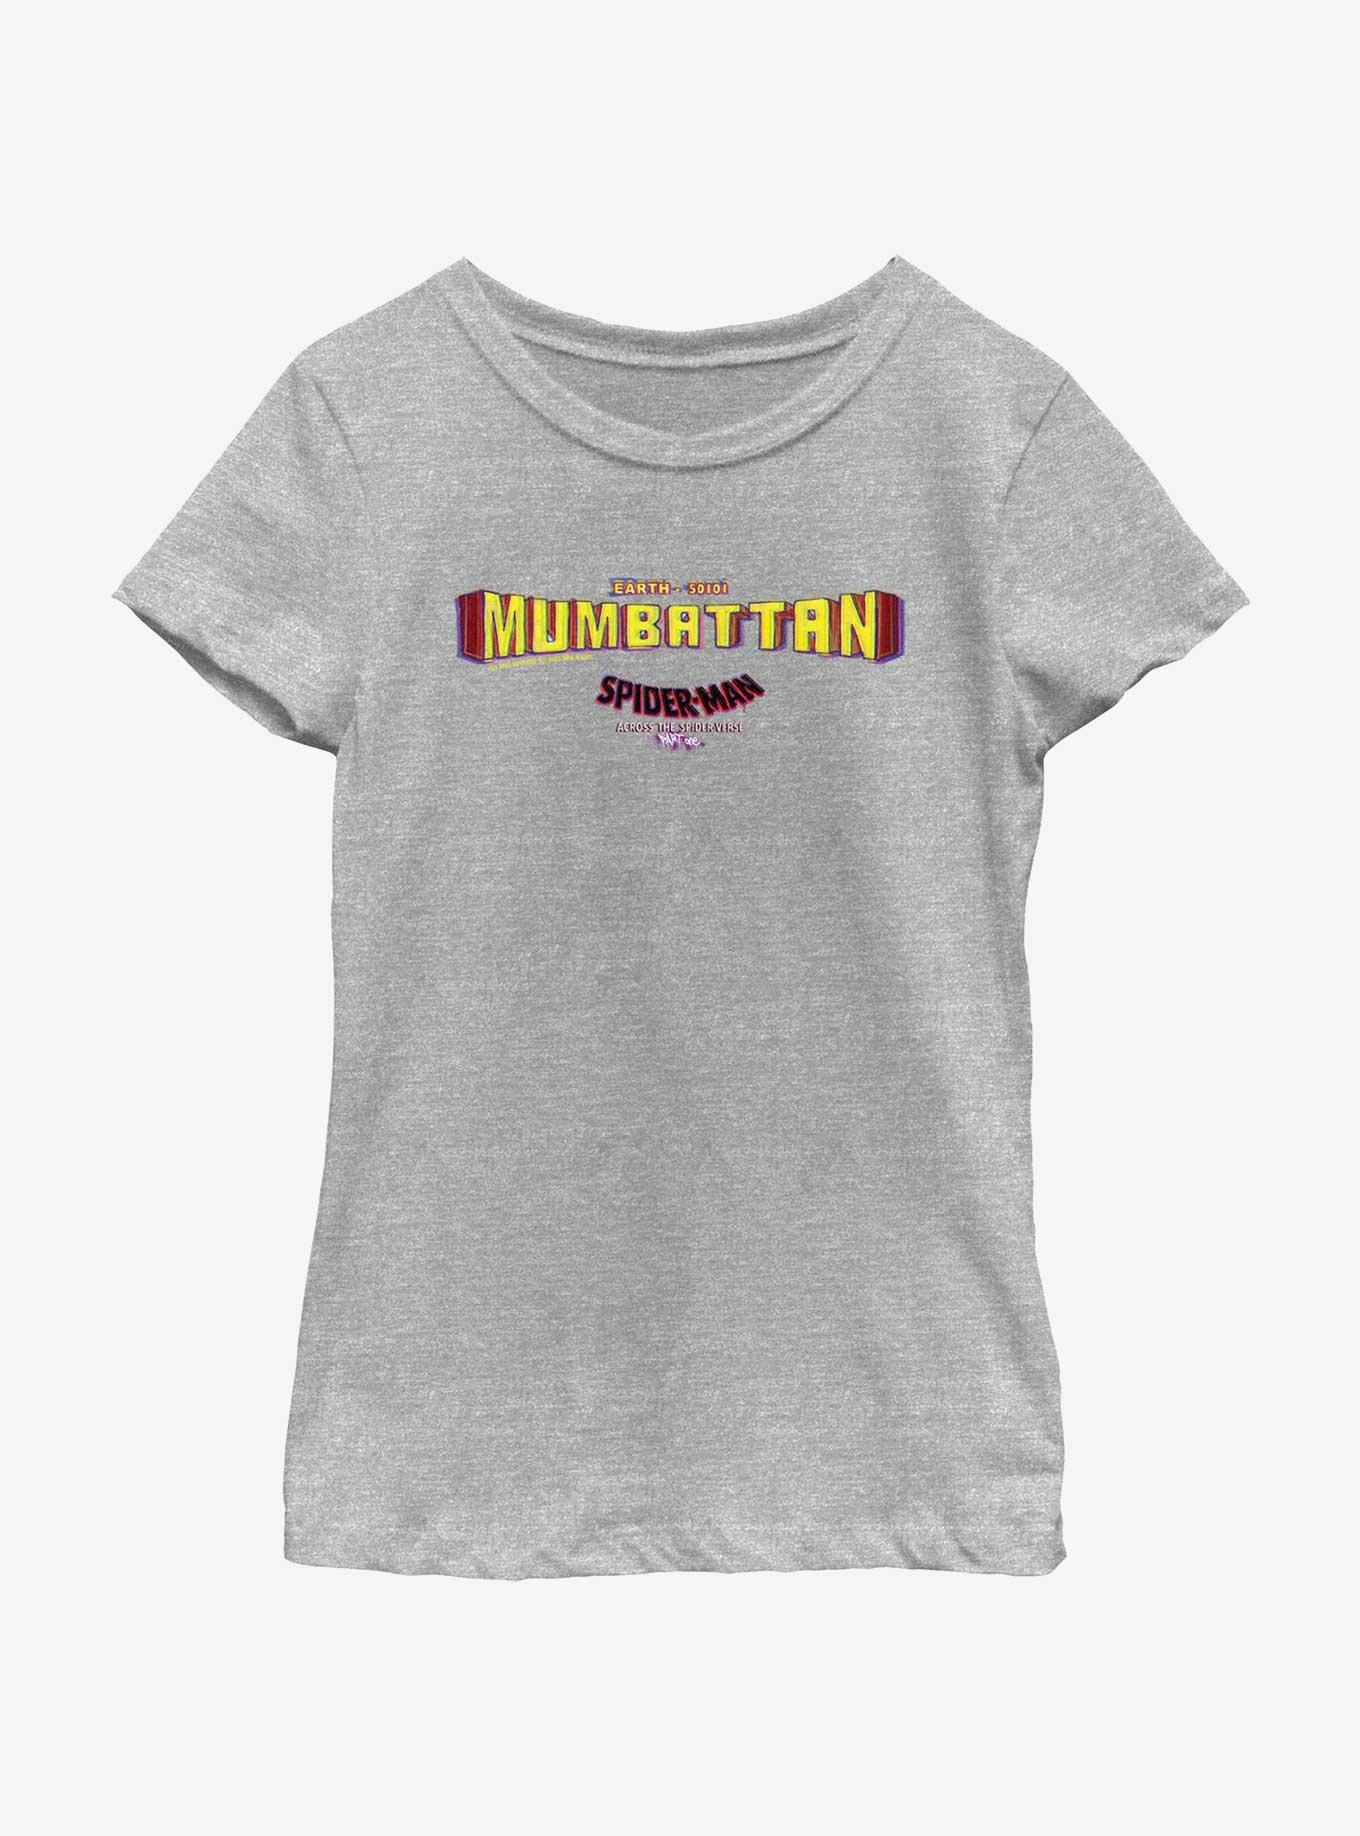 Marvel Spider-Man: Across The Spider-Verse Mumbattan Earth-50101 Youth Girls T-Shirt, ATH HTR, hi-res